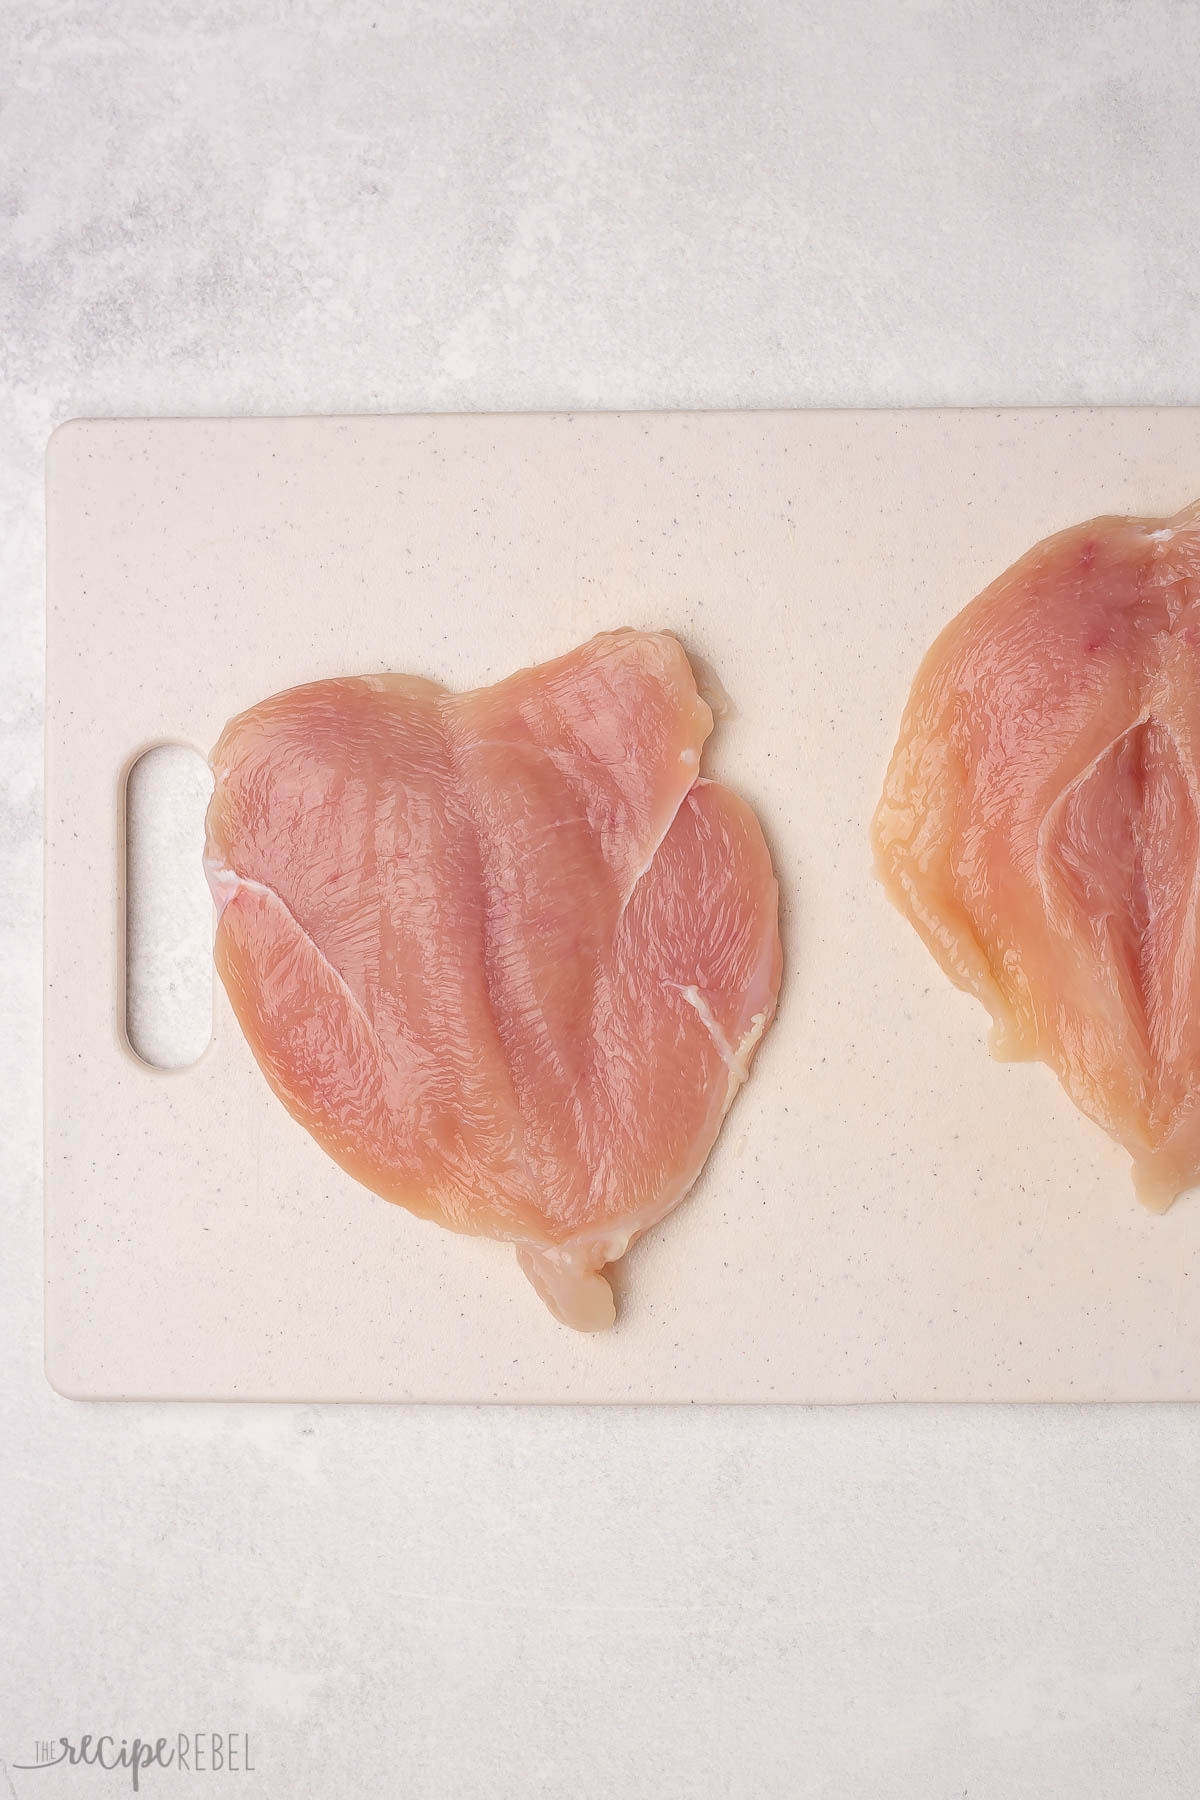 two chicken breasts sliced in half but not separated on white cutting board.